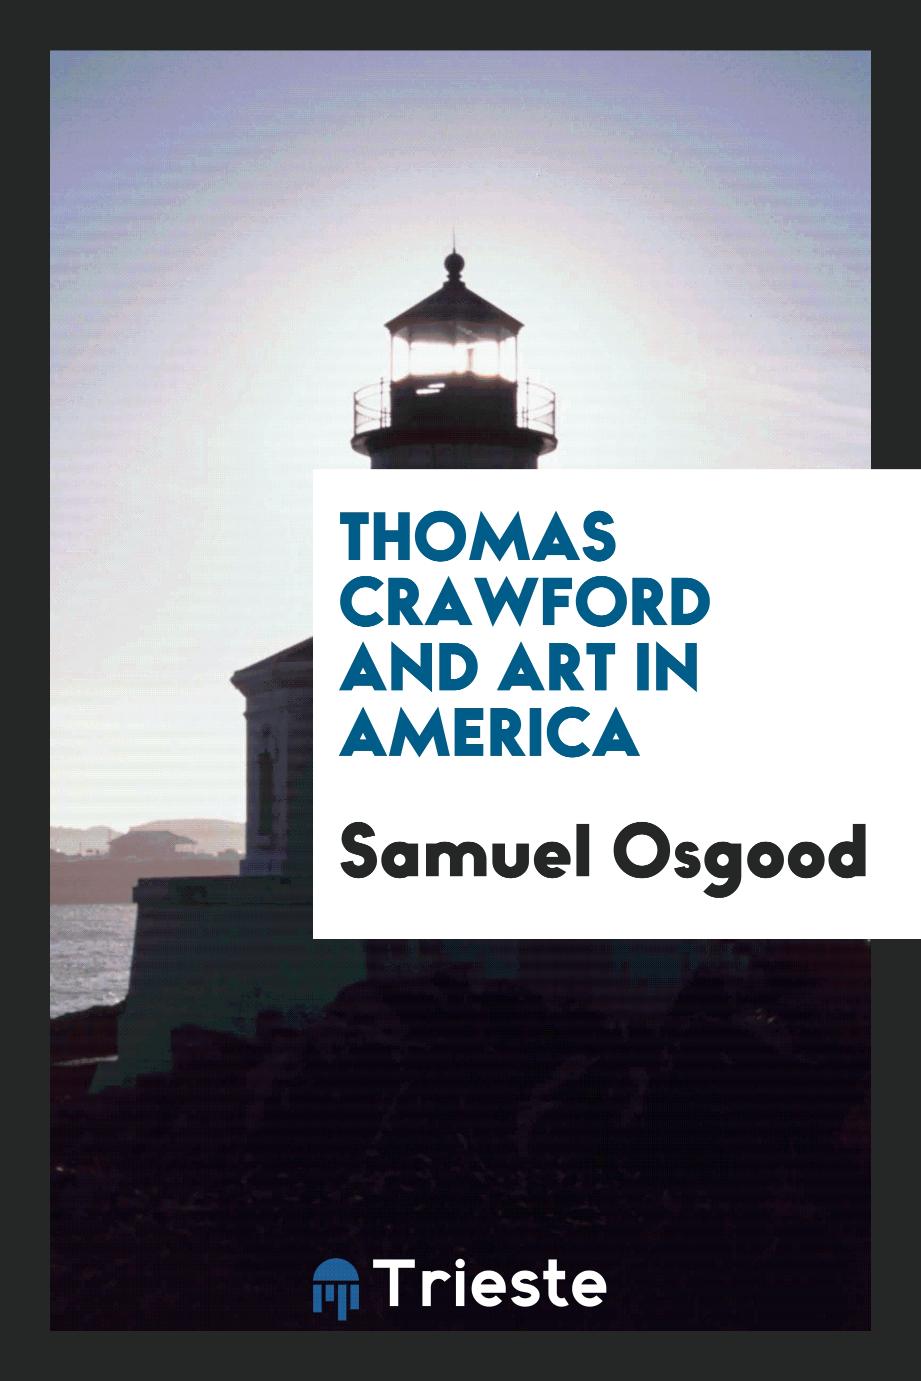 Thomas Crawford and art in America